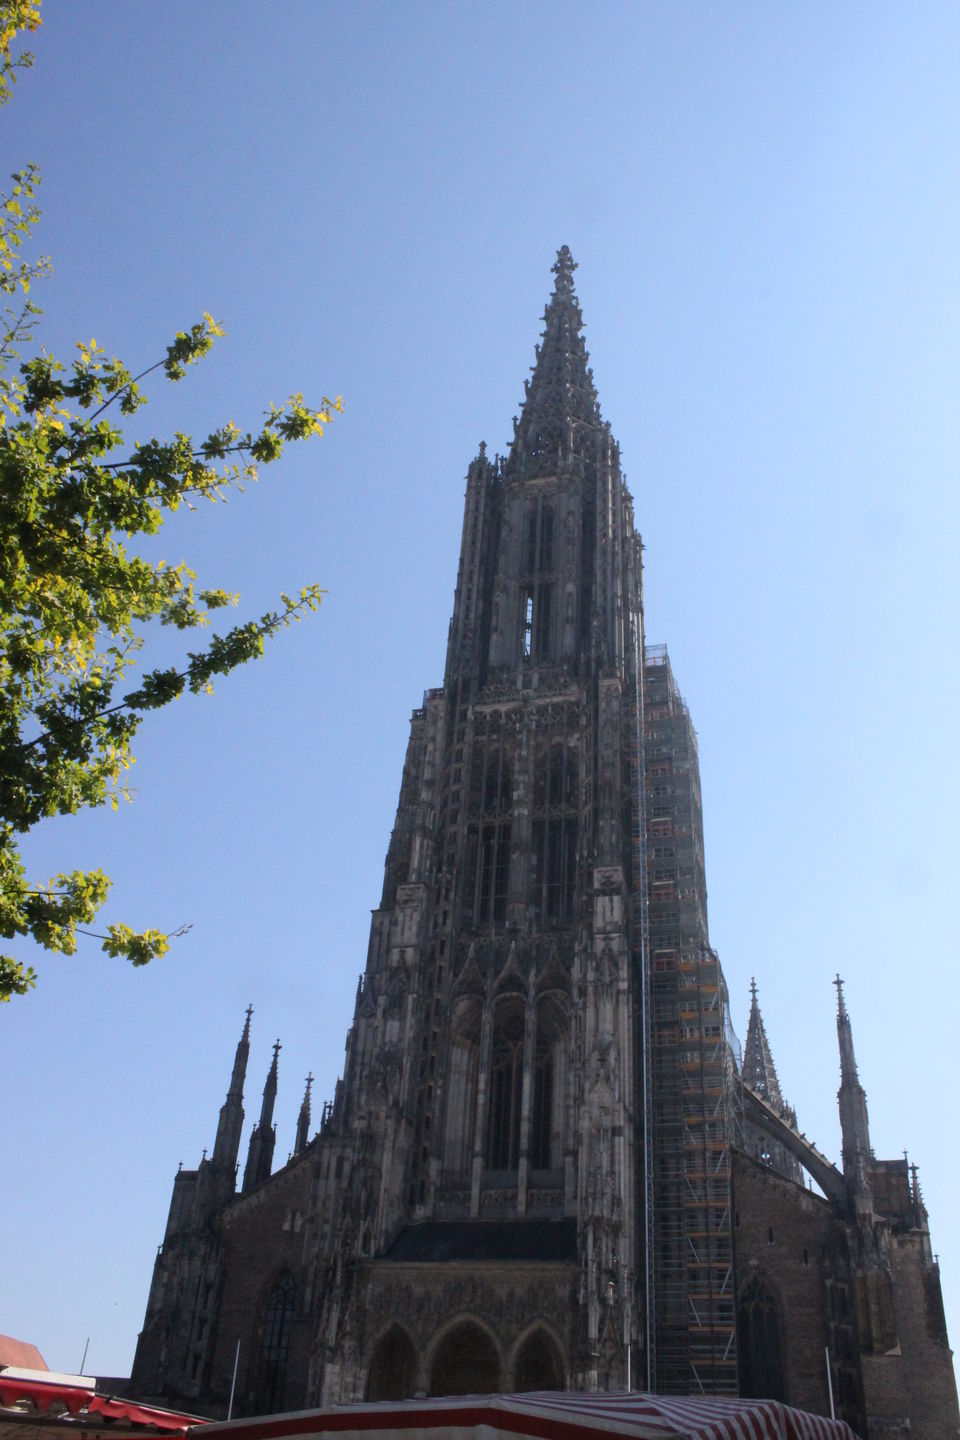 Freiburg and Ulm: Climbing Church Towers in Germany - Tripoto